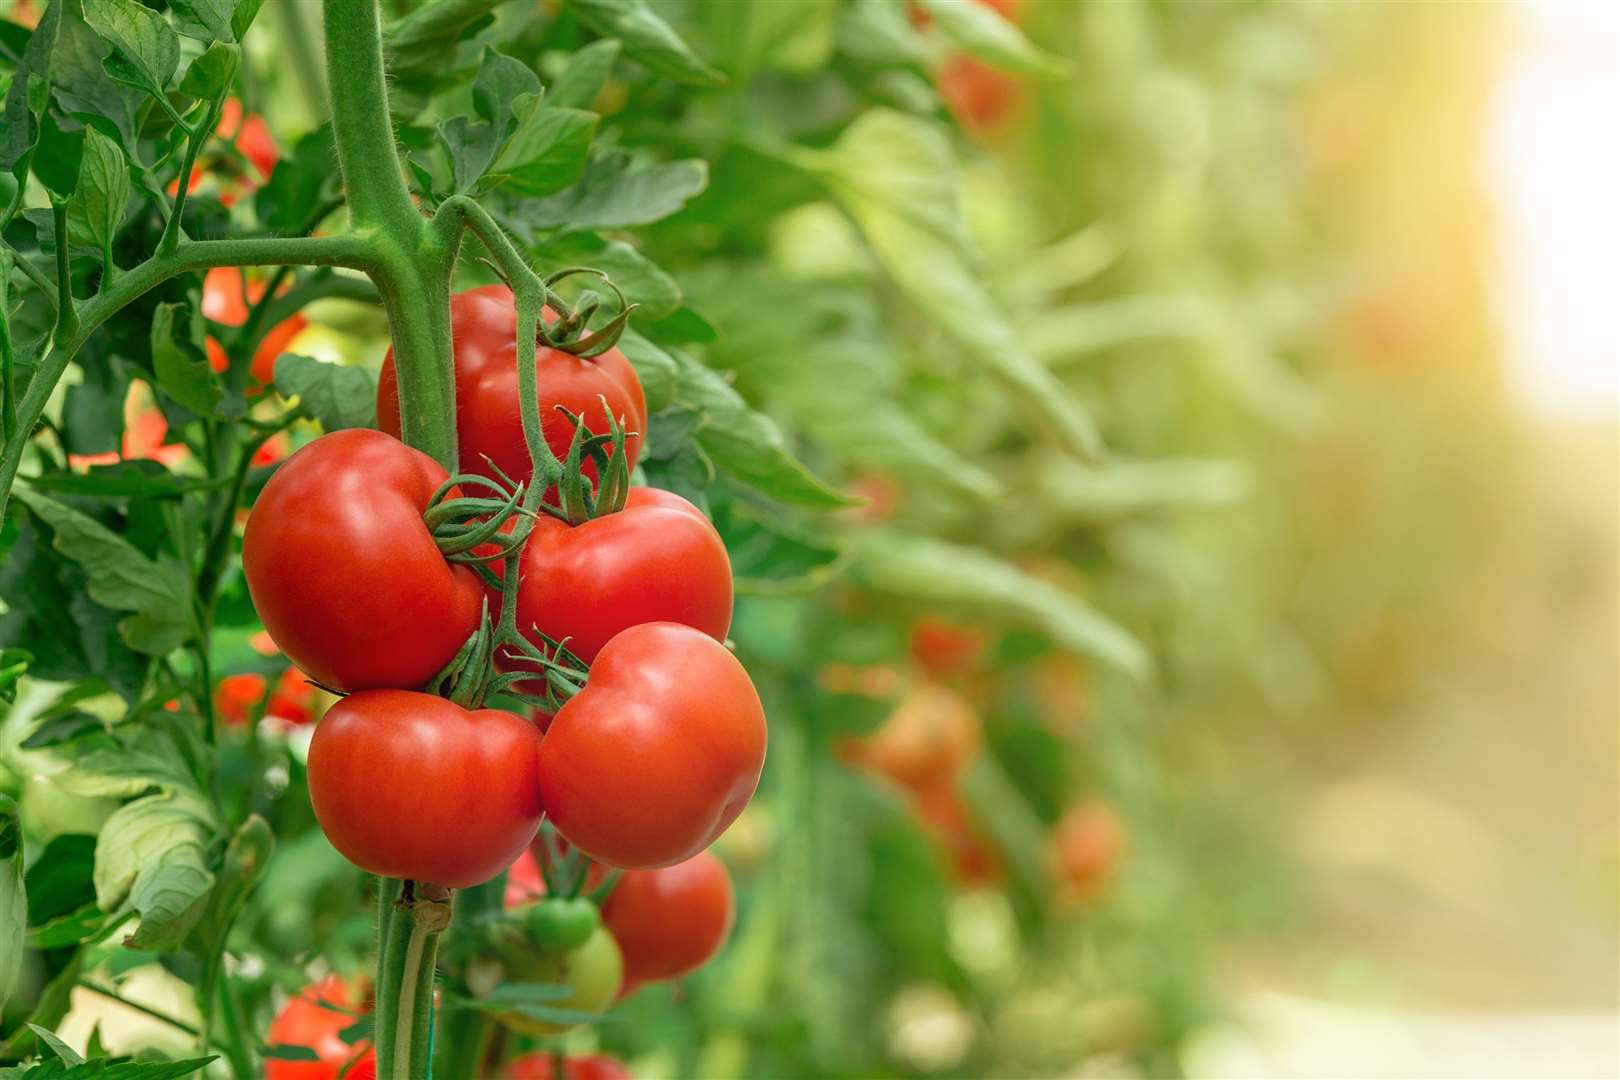 As the UK growing season gets closer British produce will help fill gaps. Image: iStock.